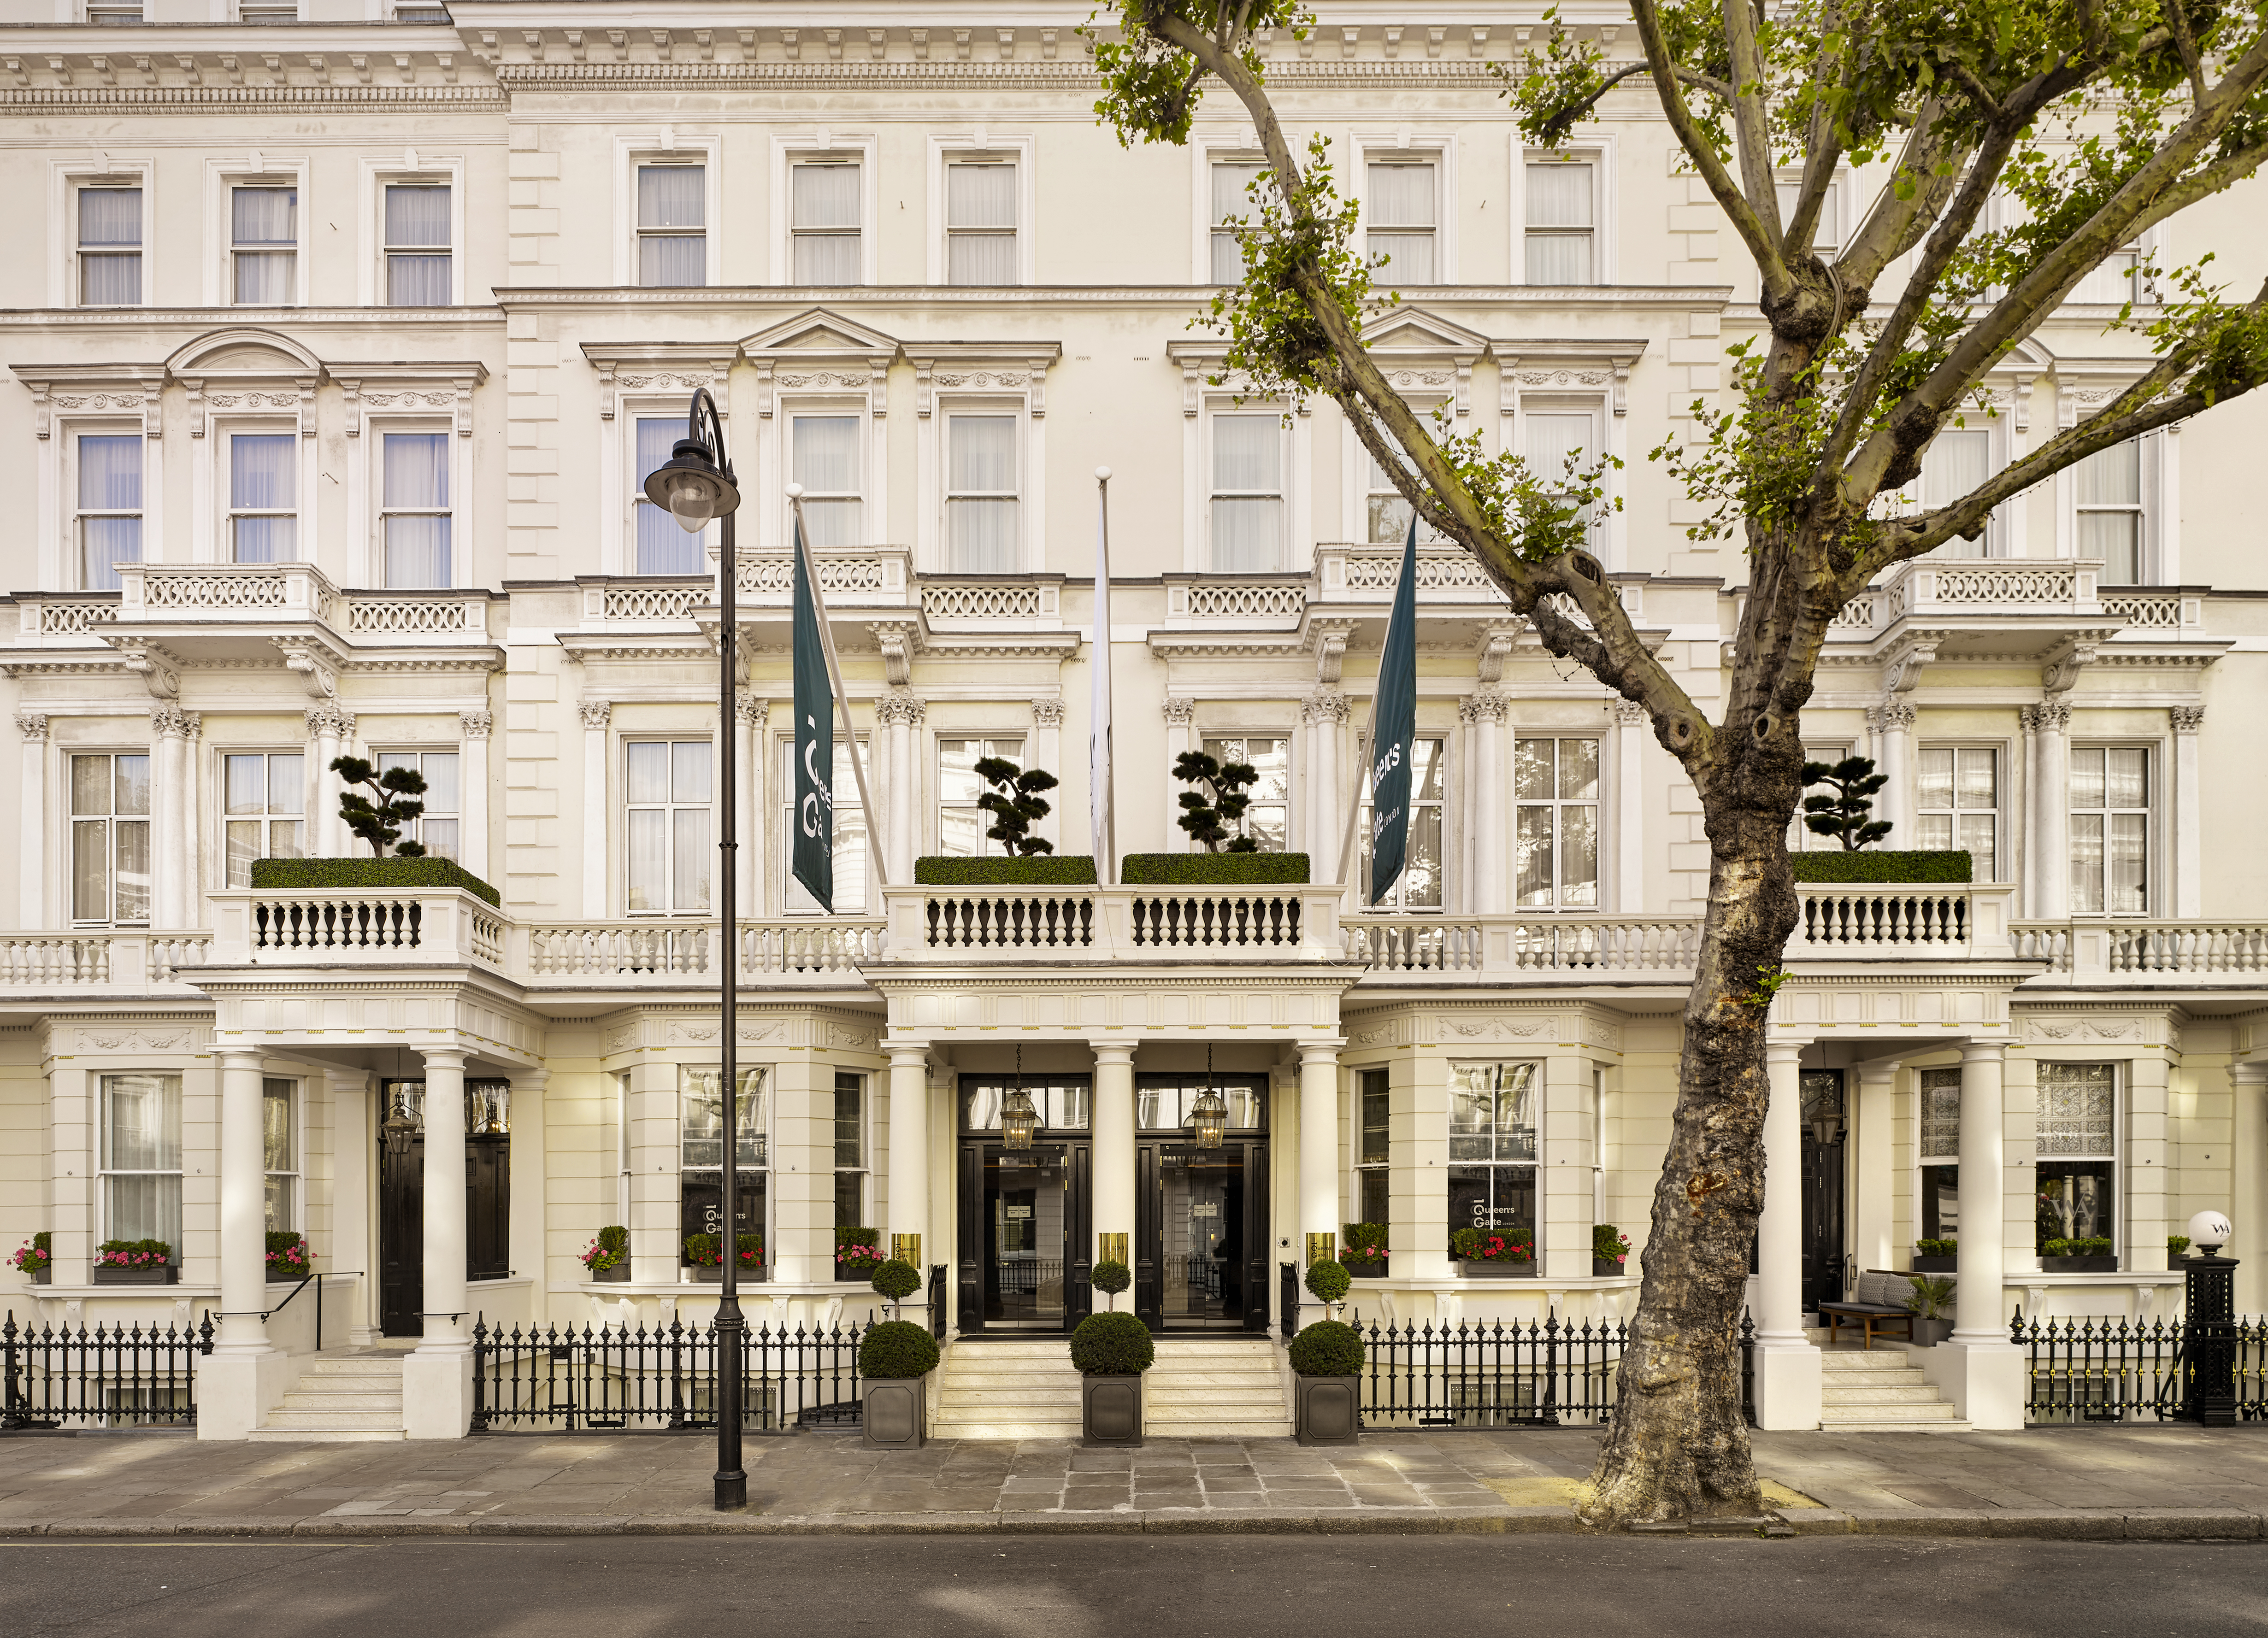 Here's everything you need to know about staying at 100 Queen's Gate Hotel